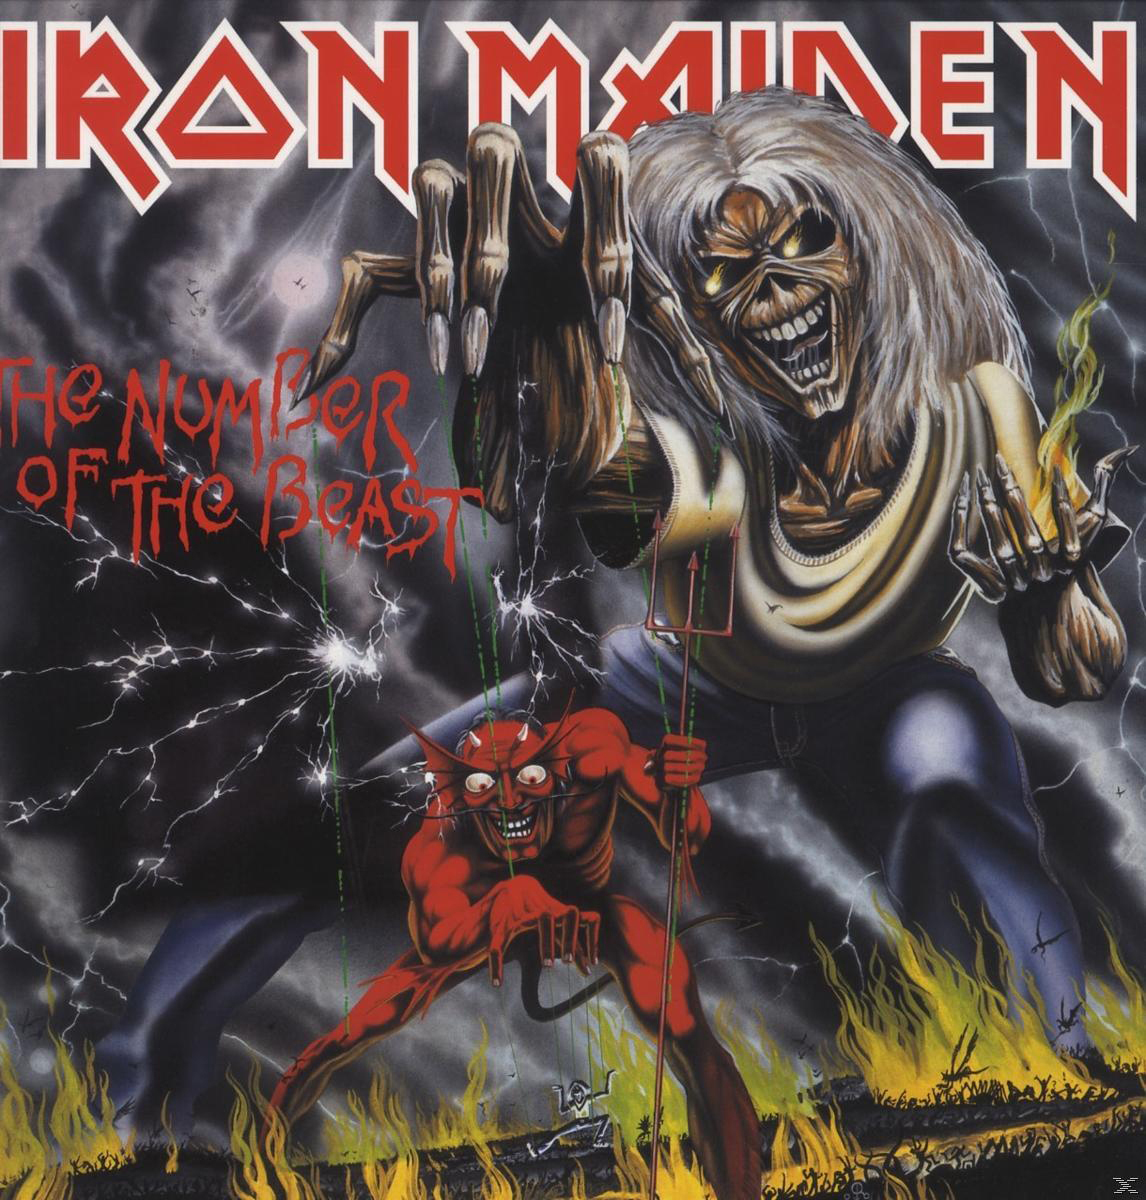 Iron Maiden - The Beast Of (Vinyl) - The Number